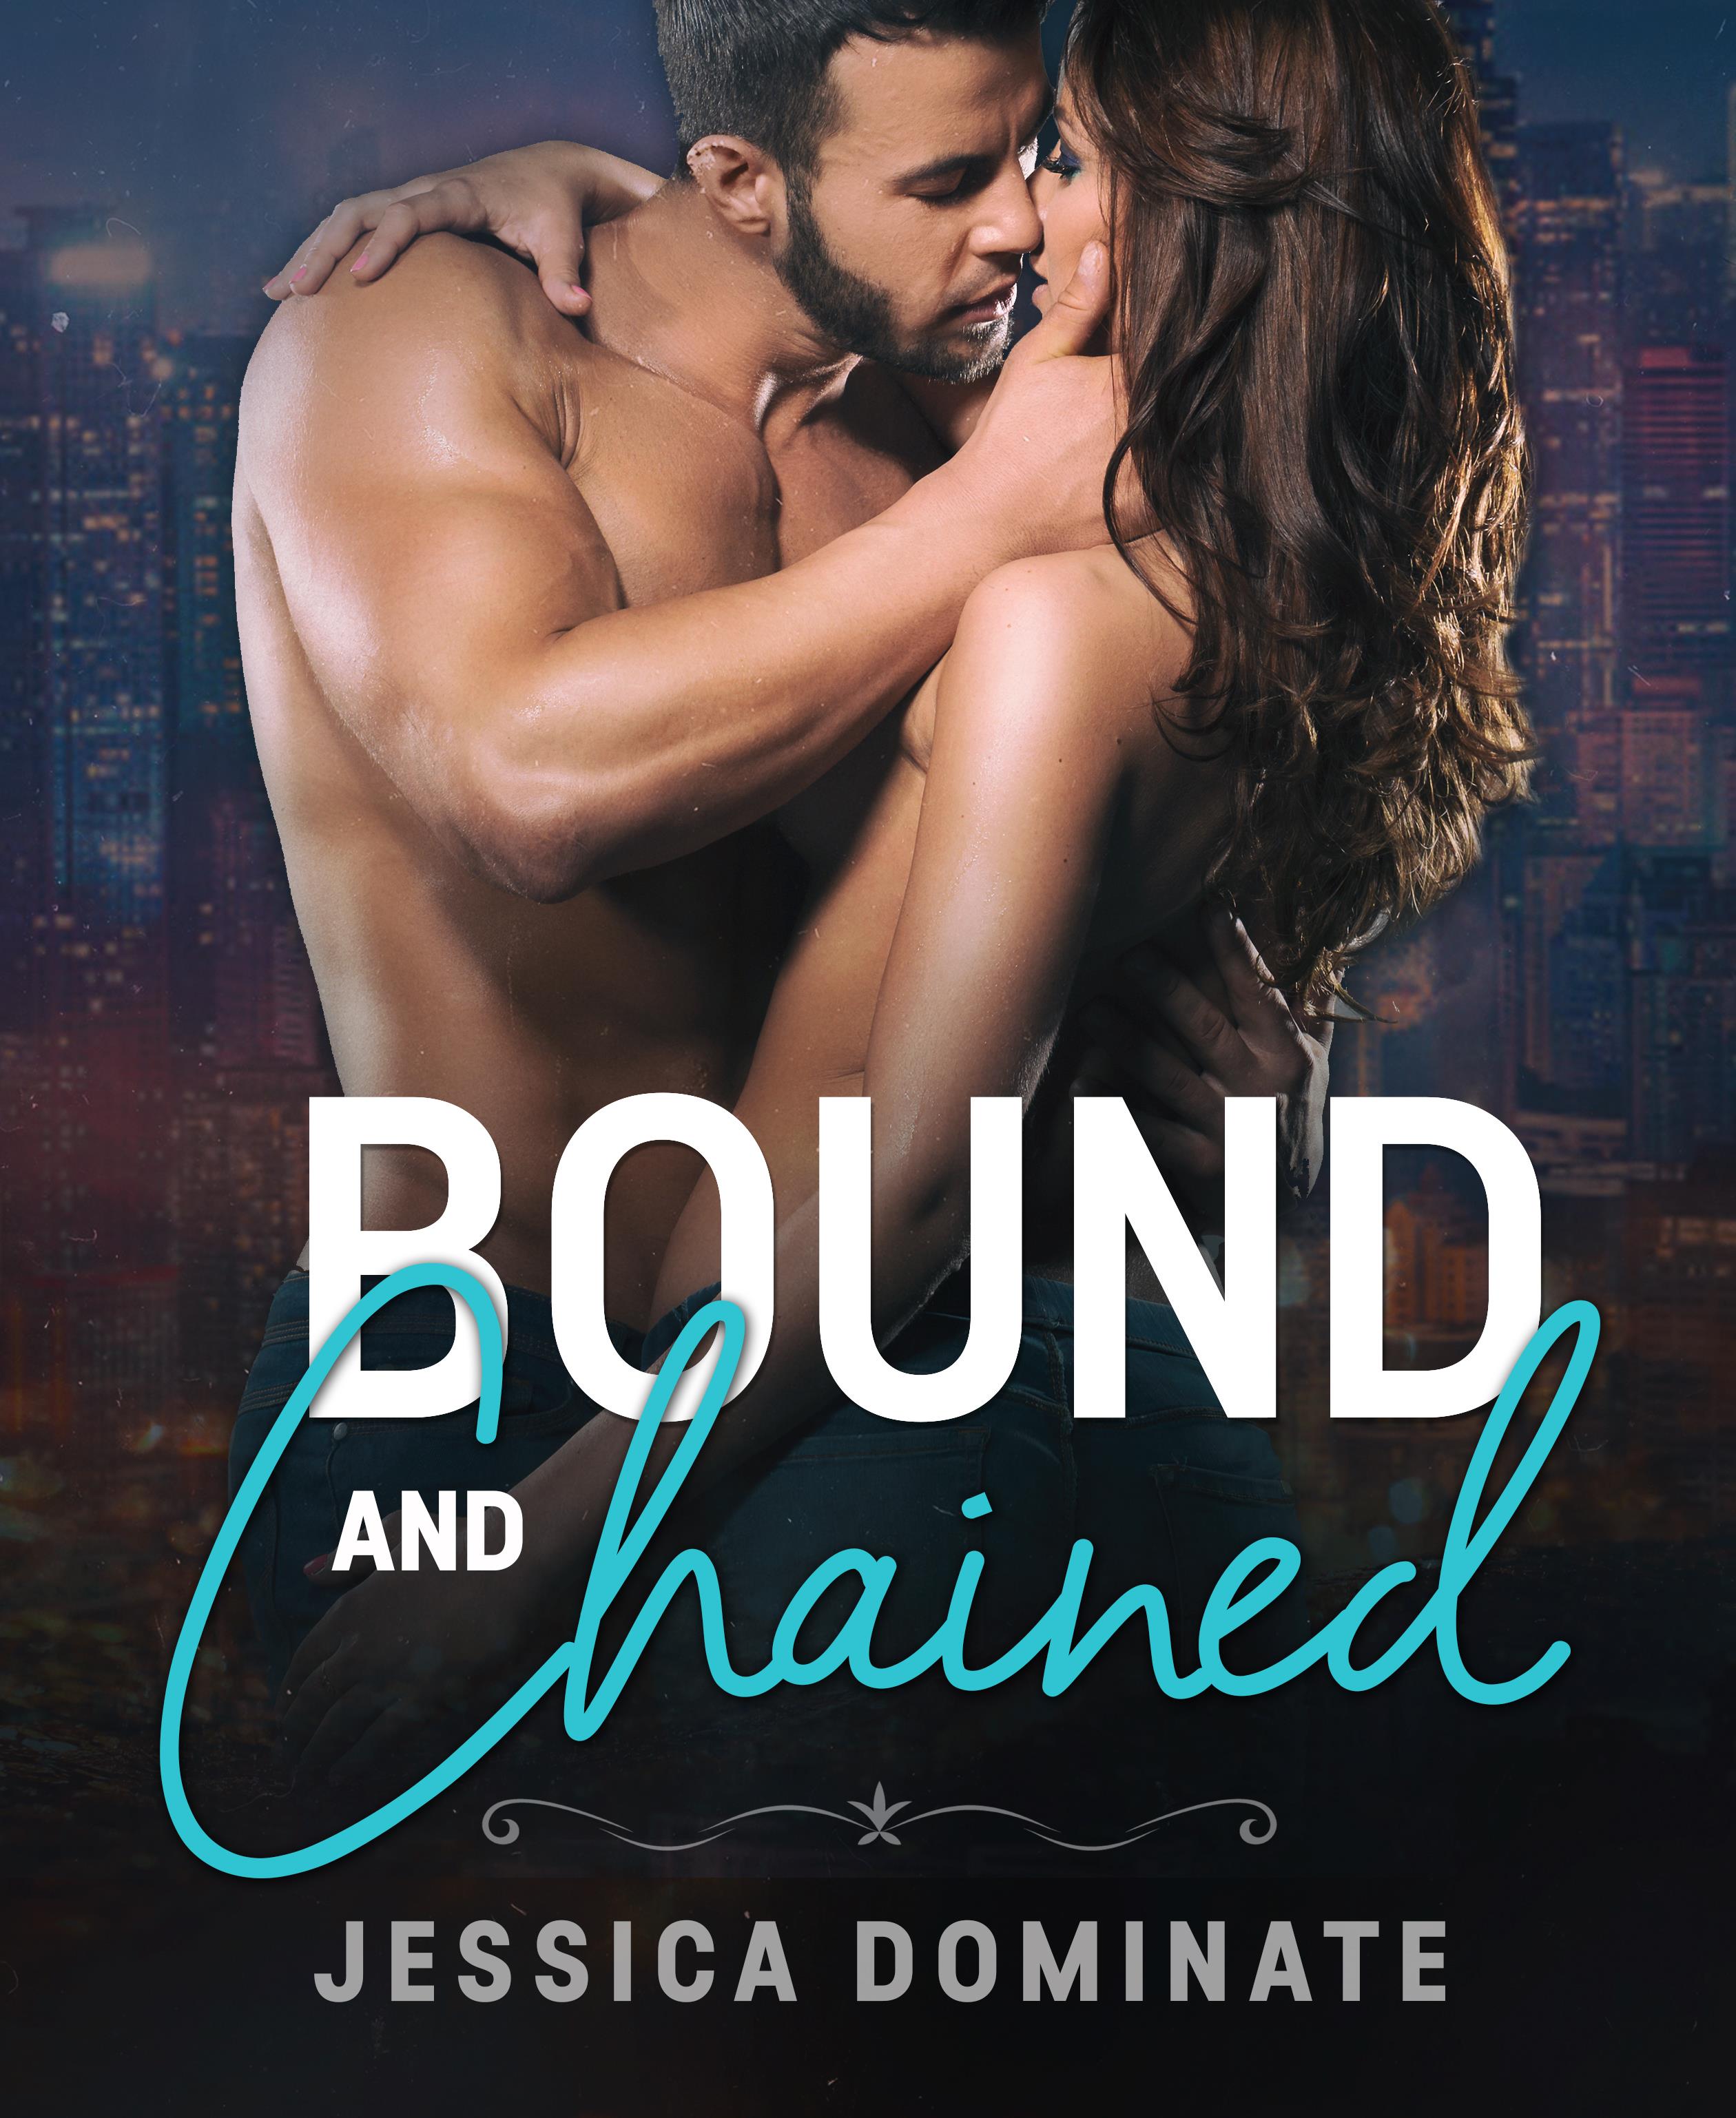 Bound-and-chained